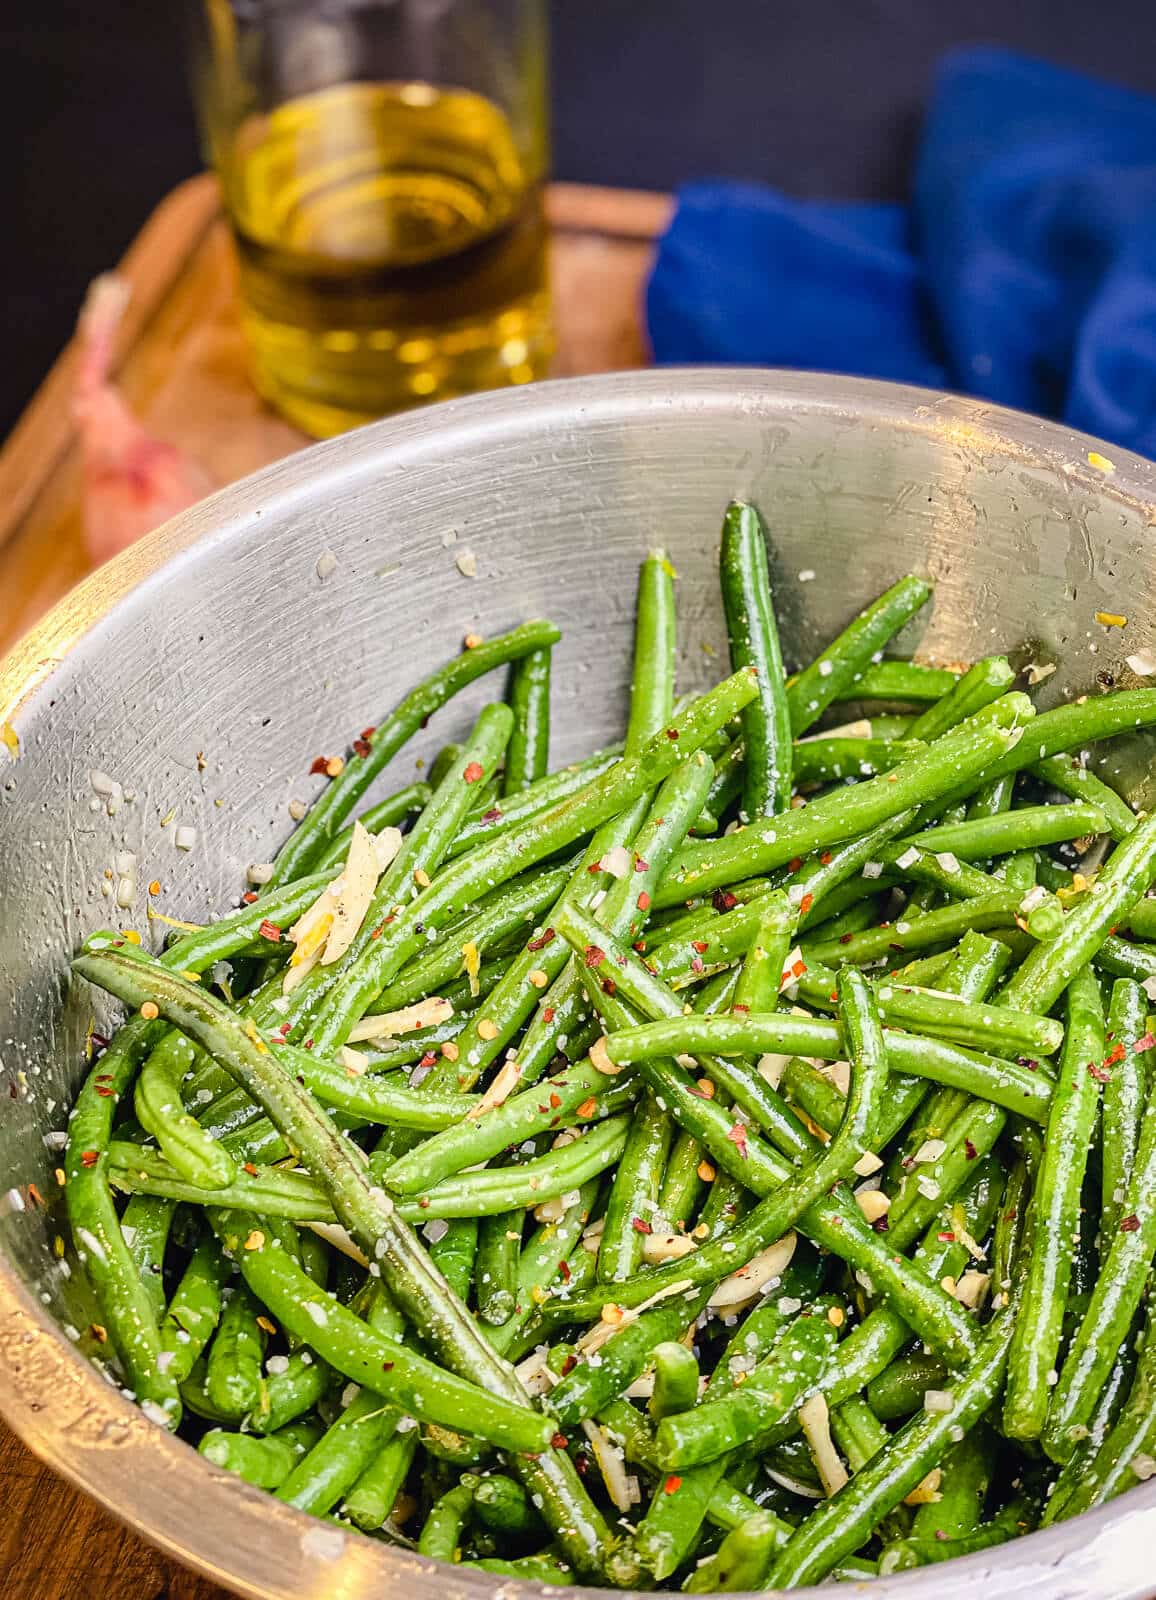 roasted green bean ingredients mixed together in a mixing bowl